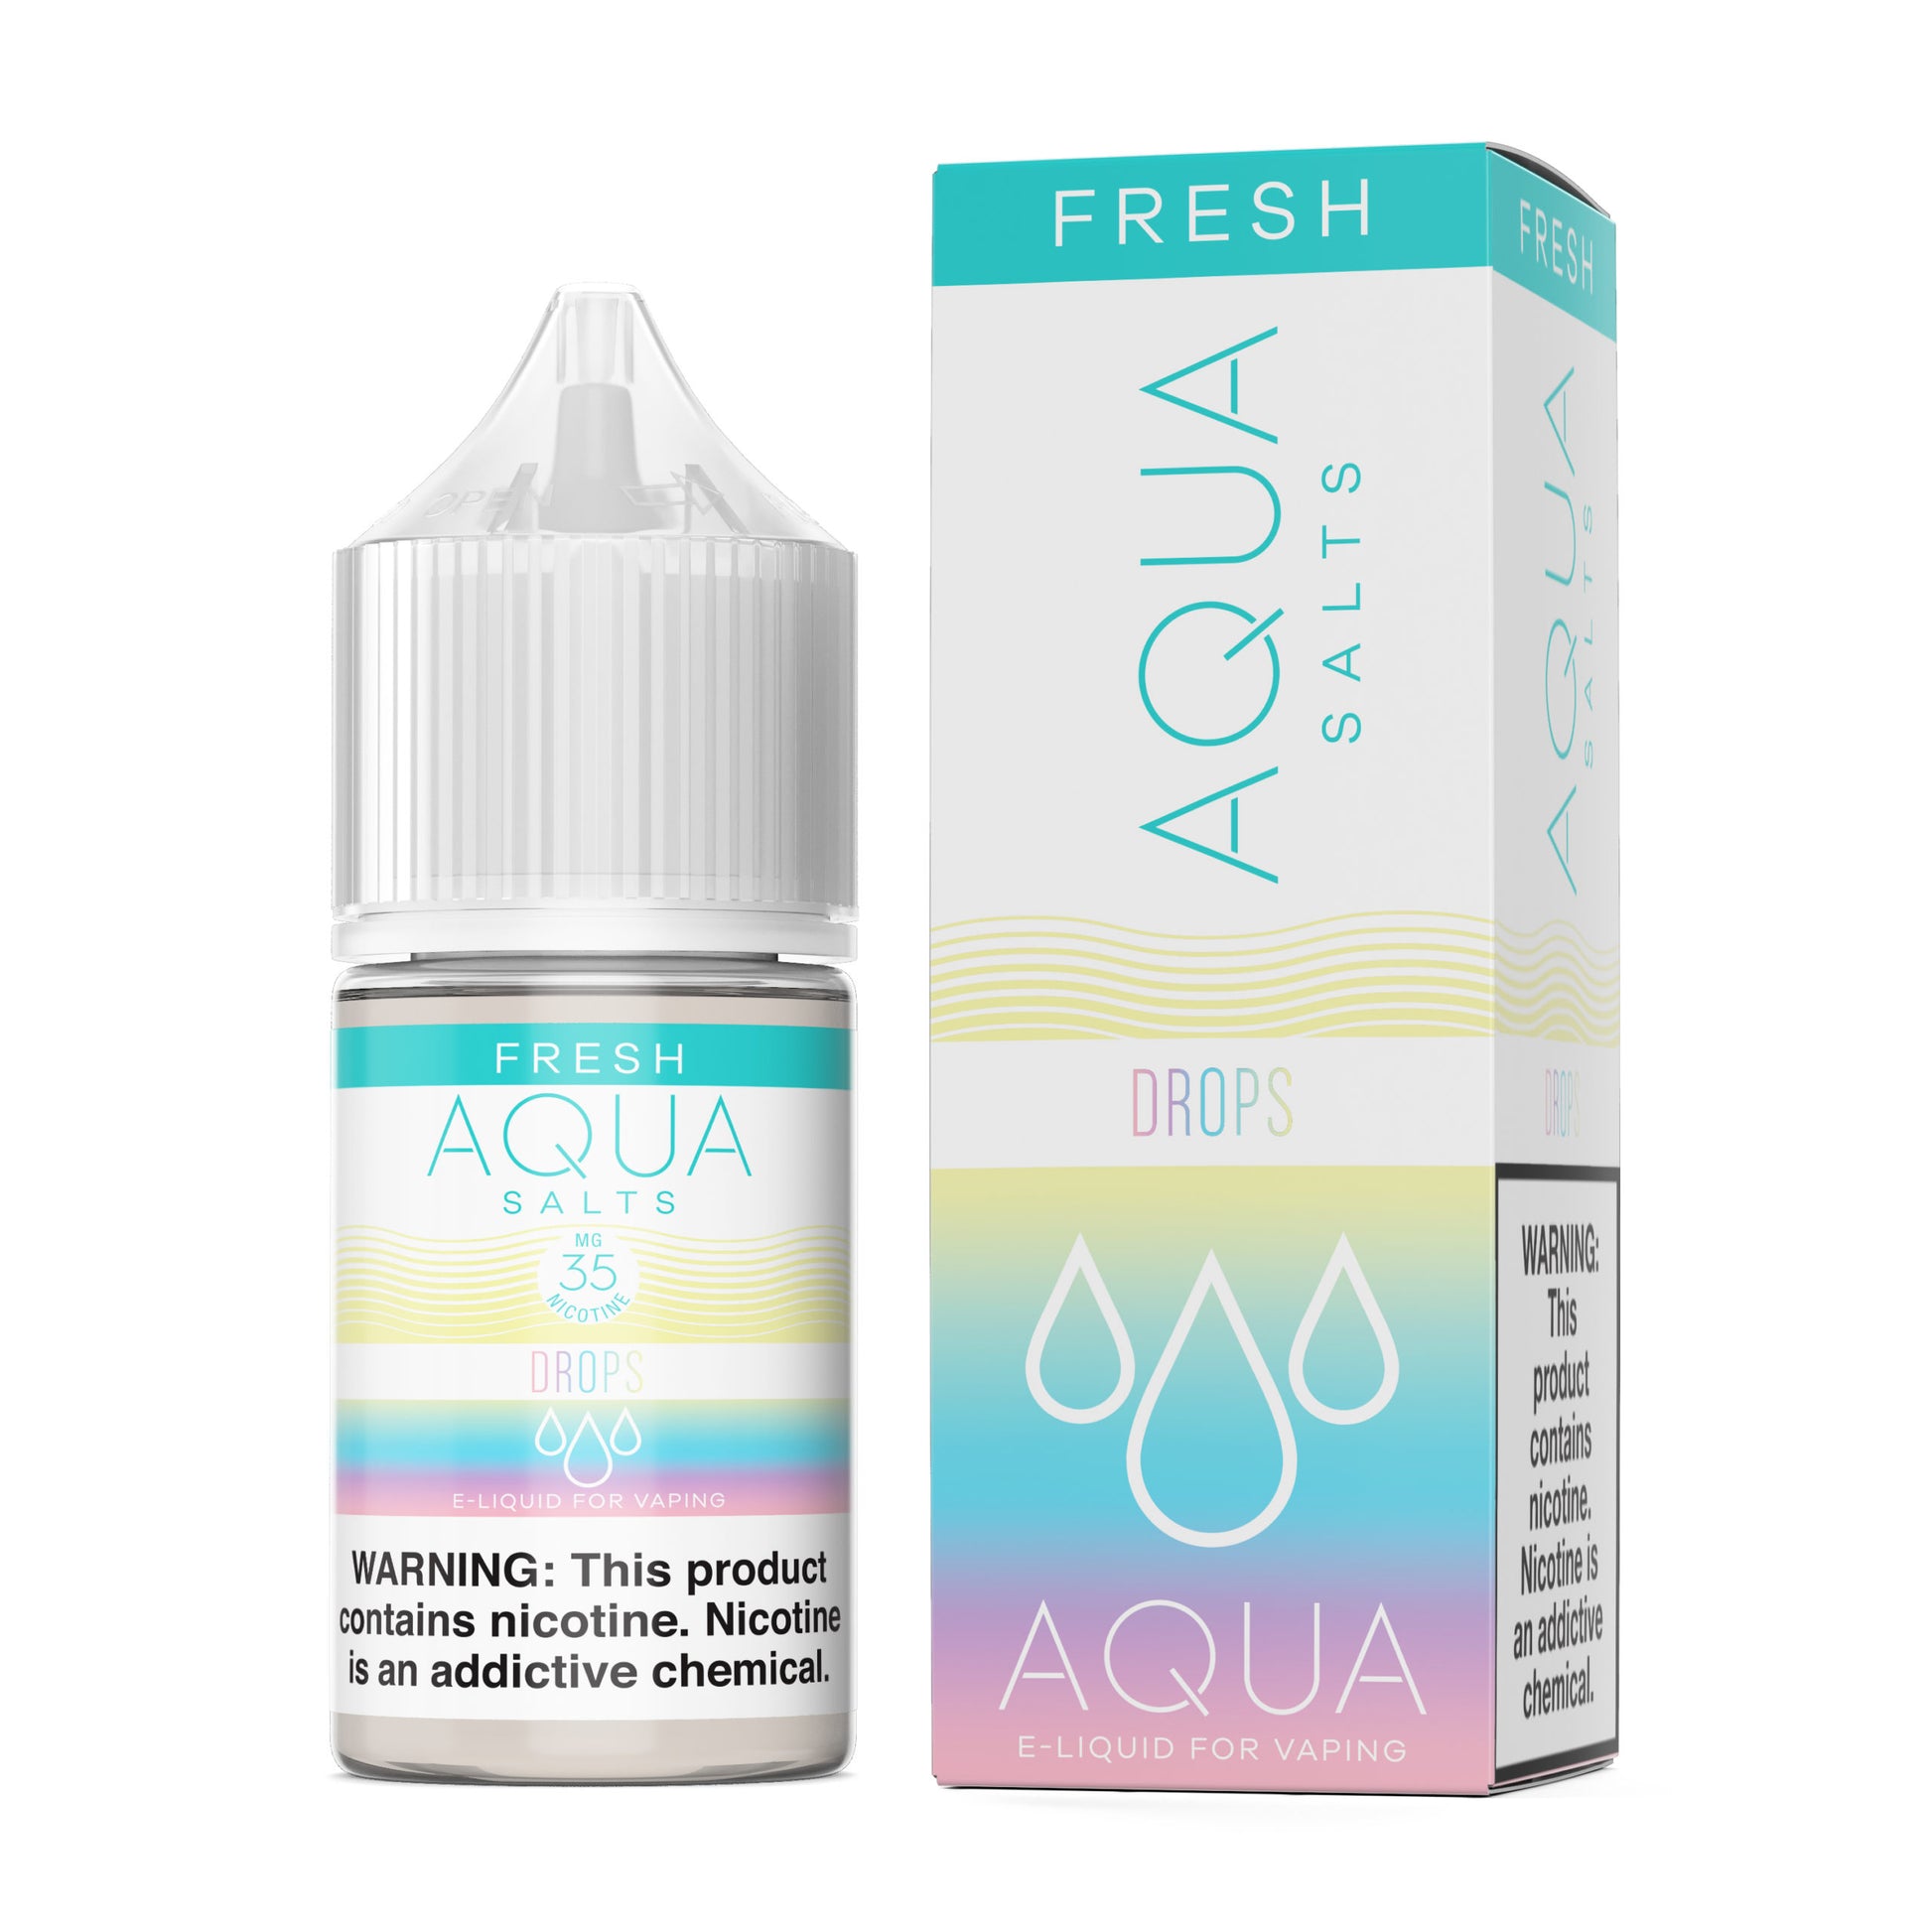 Drops by Aqua Salts Series 30mL with packaging